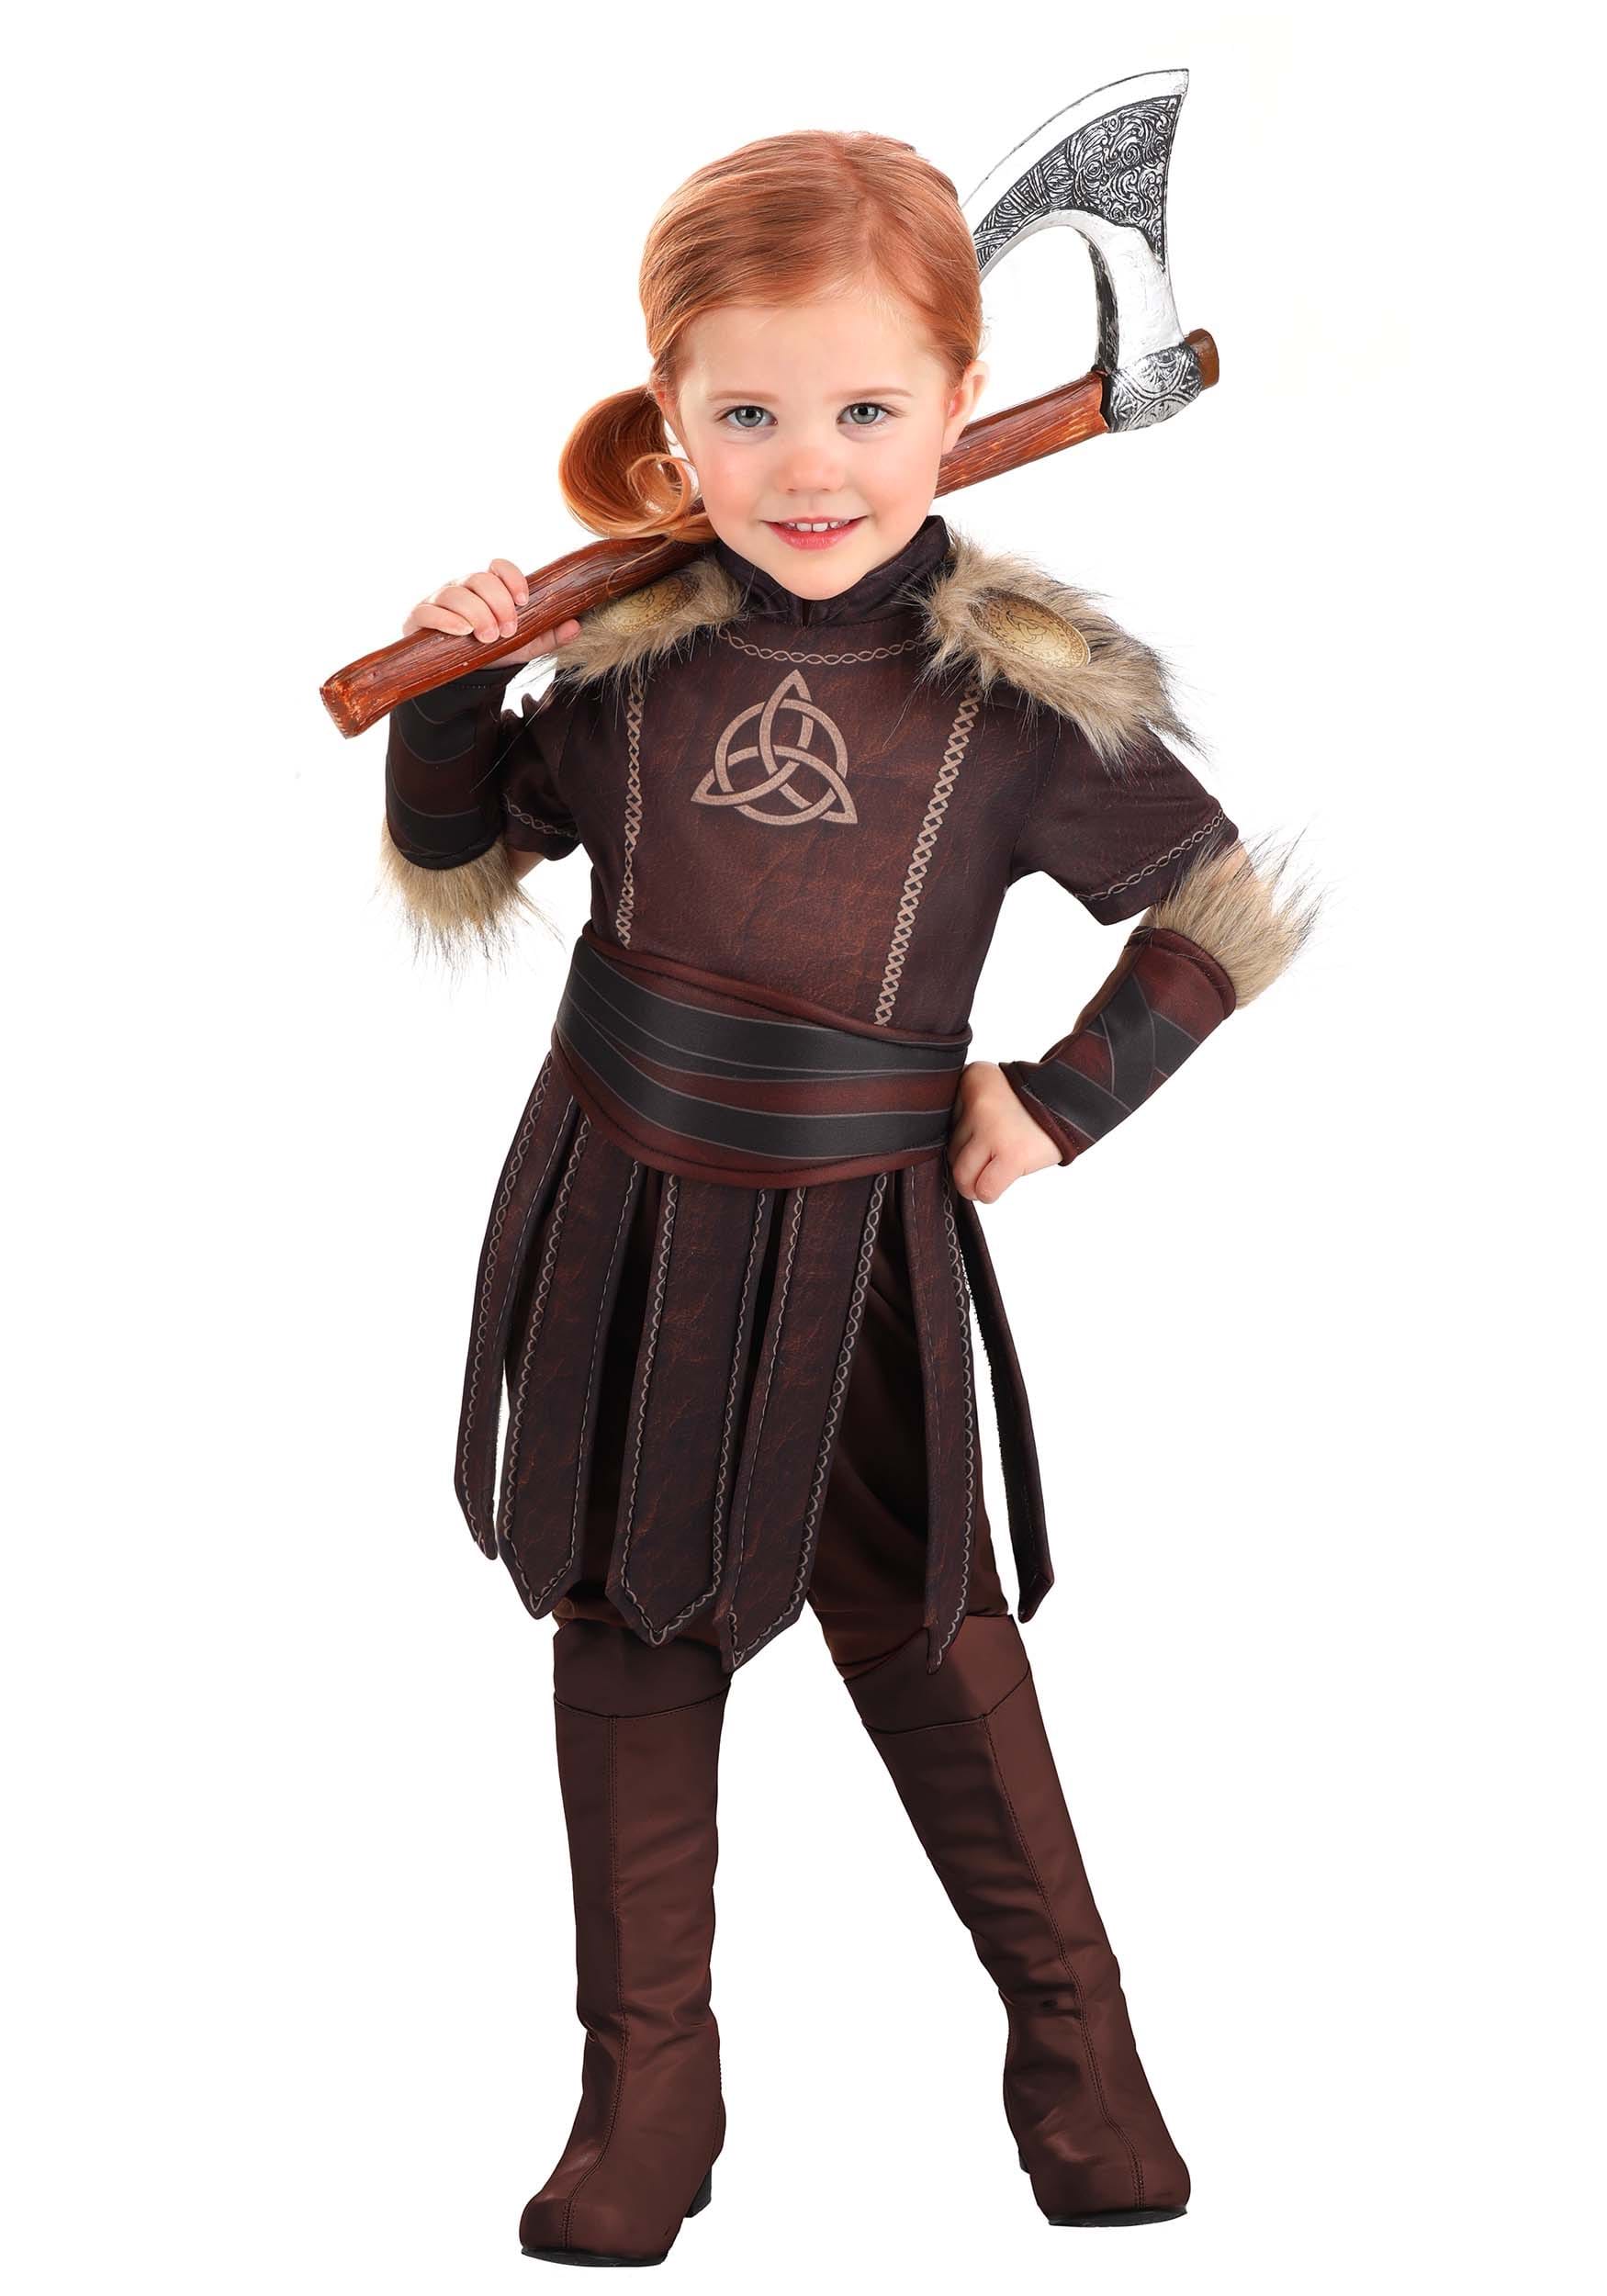 Viking Costume Women - A complete costume. Buy here!